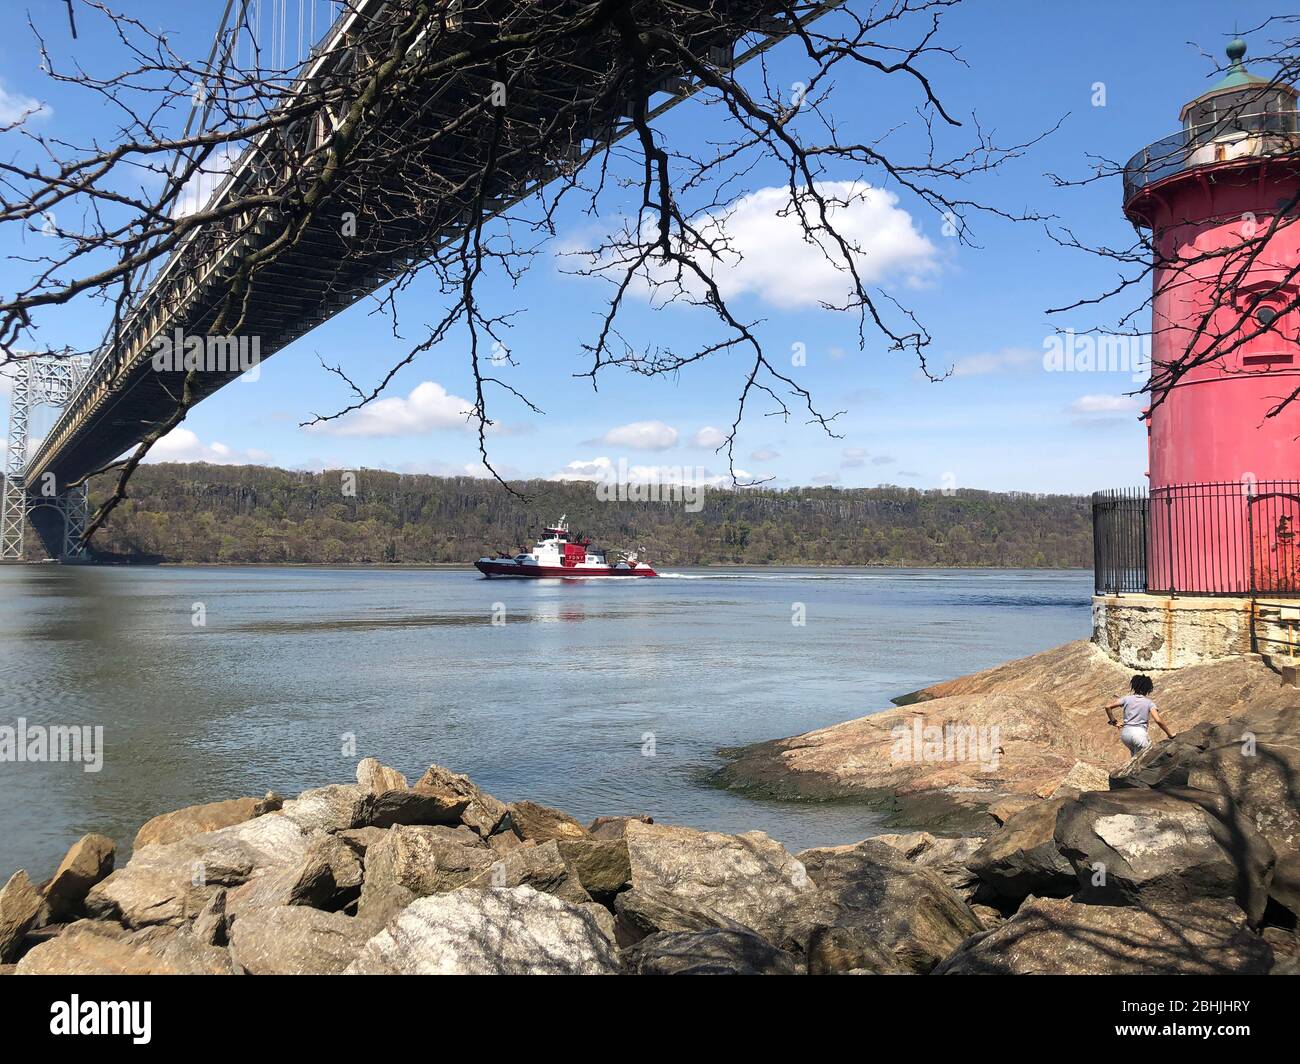 New York, USA. April 2020. New York fire department boat underway on River Hudson under George Washington Bridge from the Little Red Lighthouse. Jeffr Stock Photo